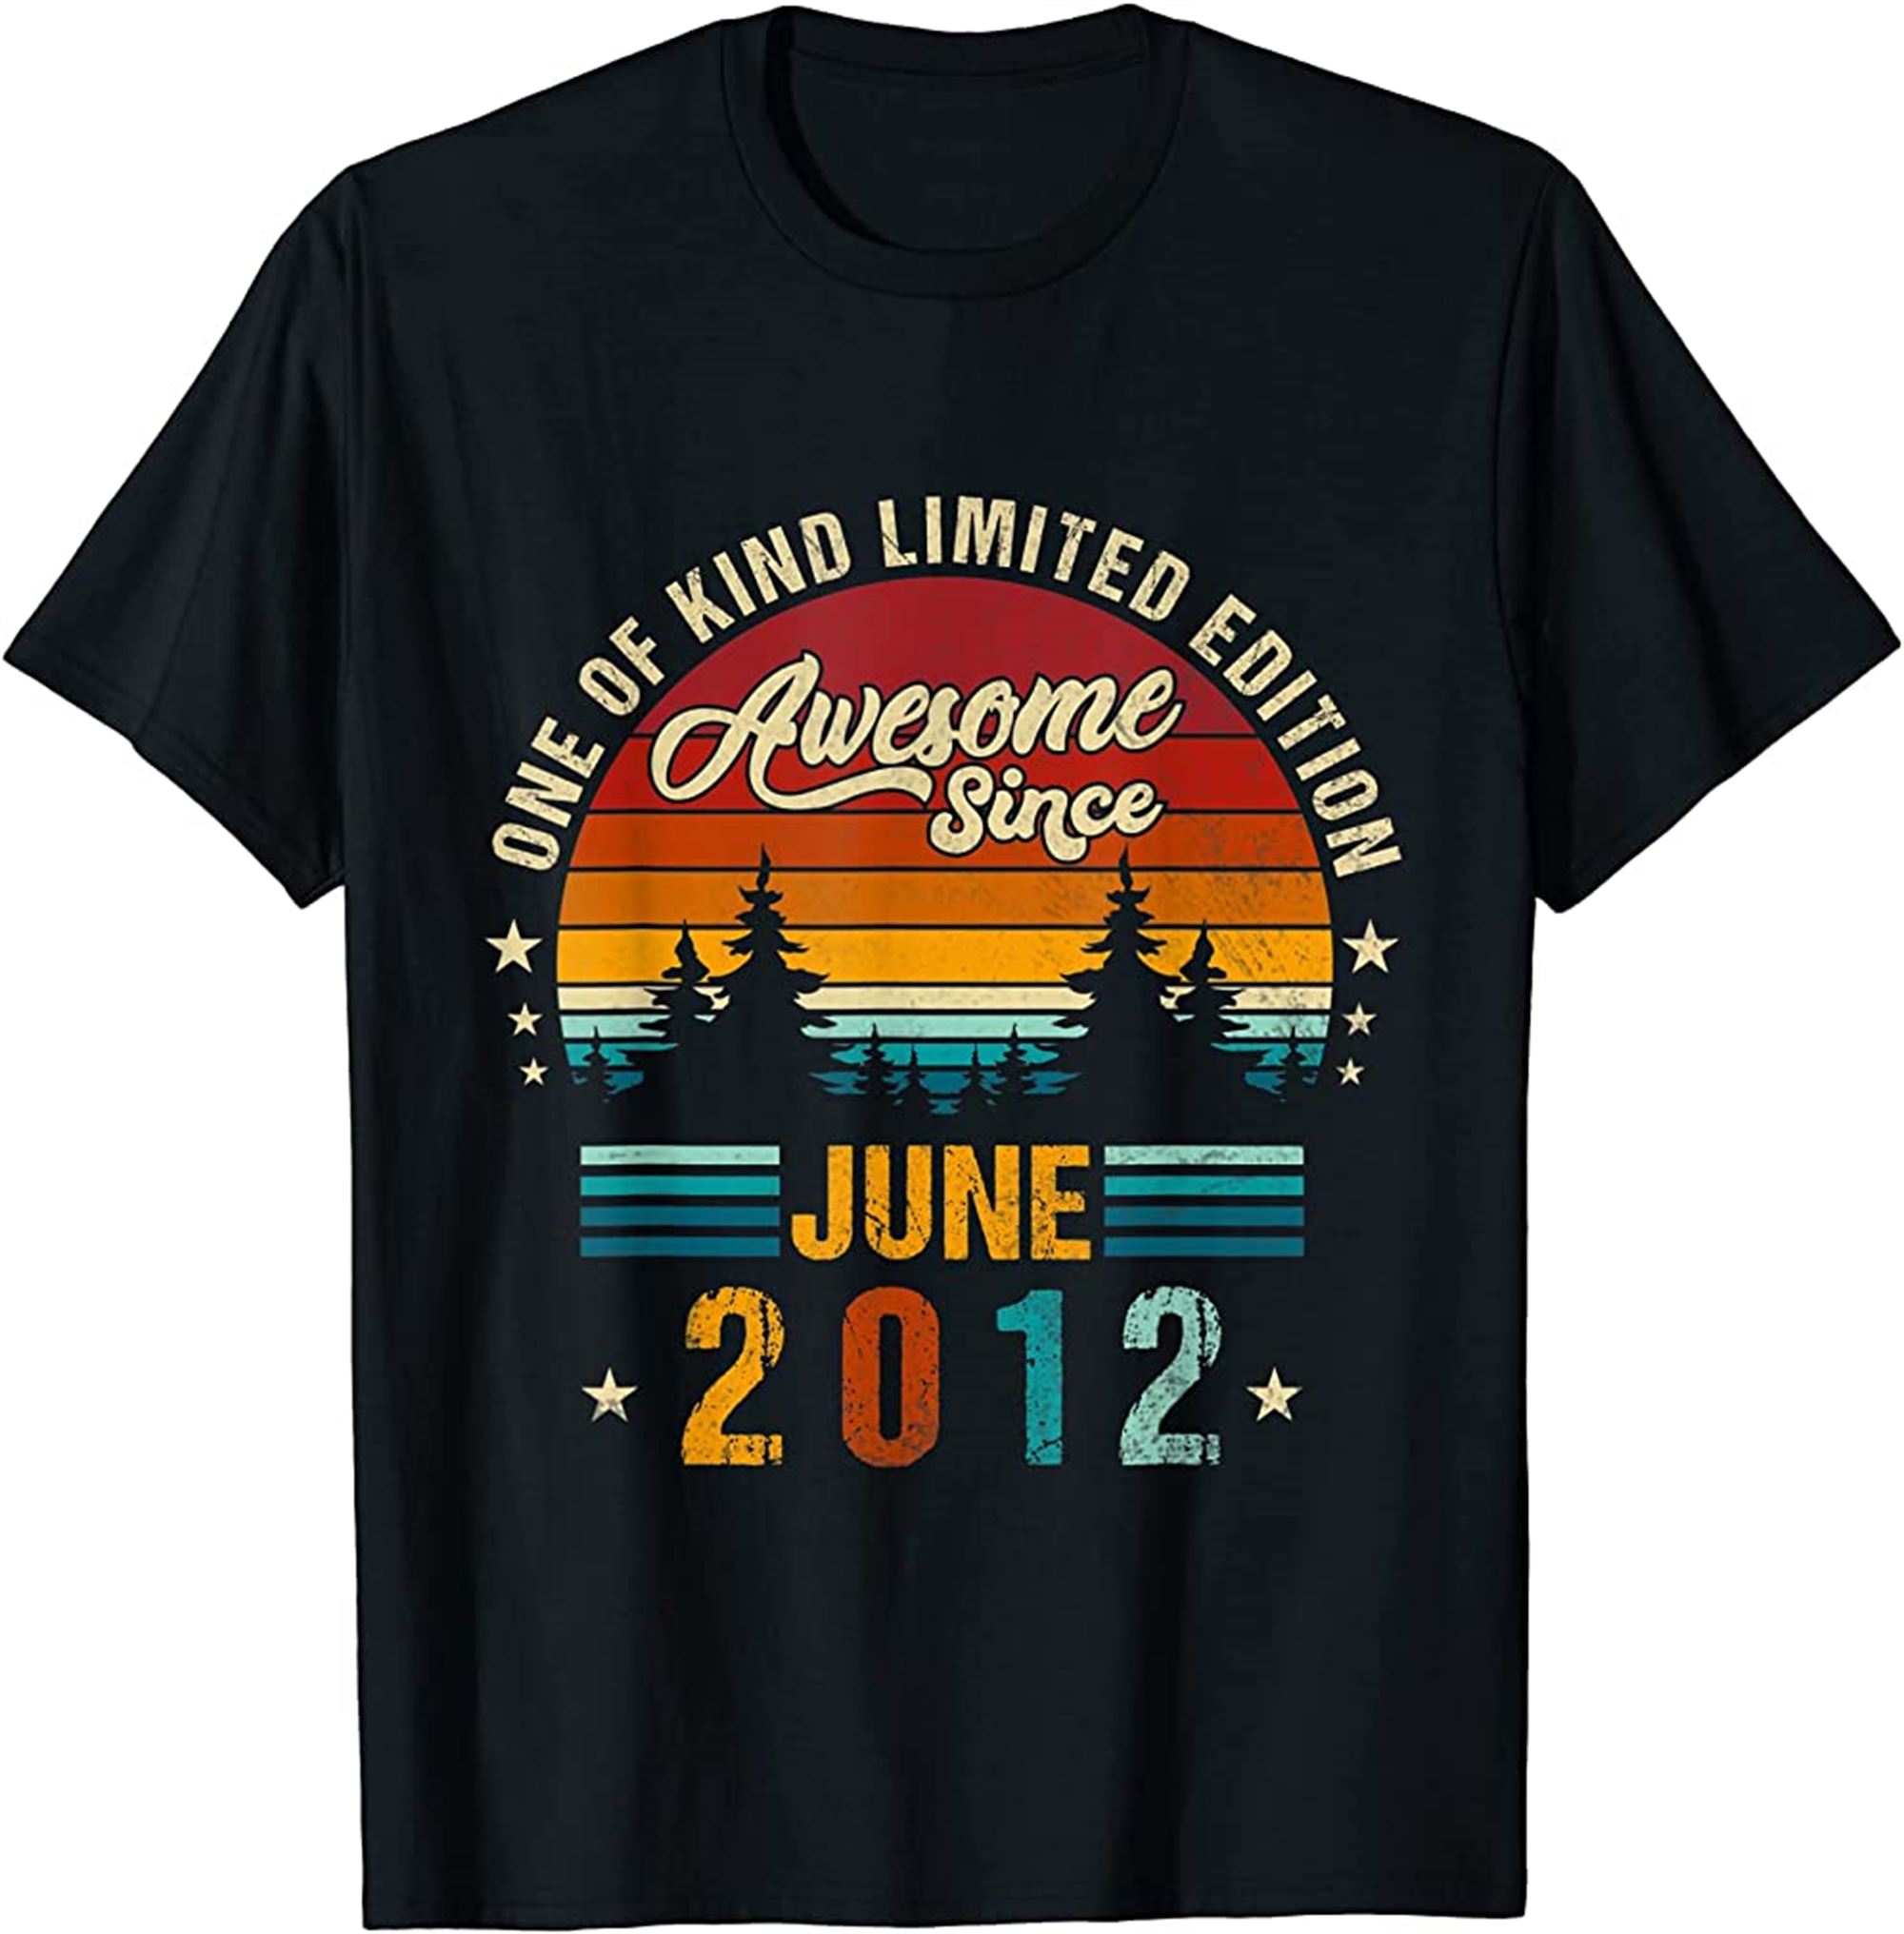 Vintage 10th Birthday Awesome Since June 2012 Epic Legend T-shirt Size Up To 5xl